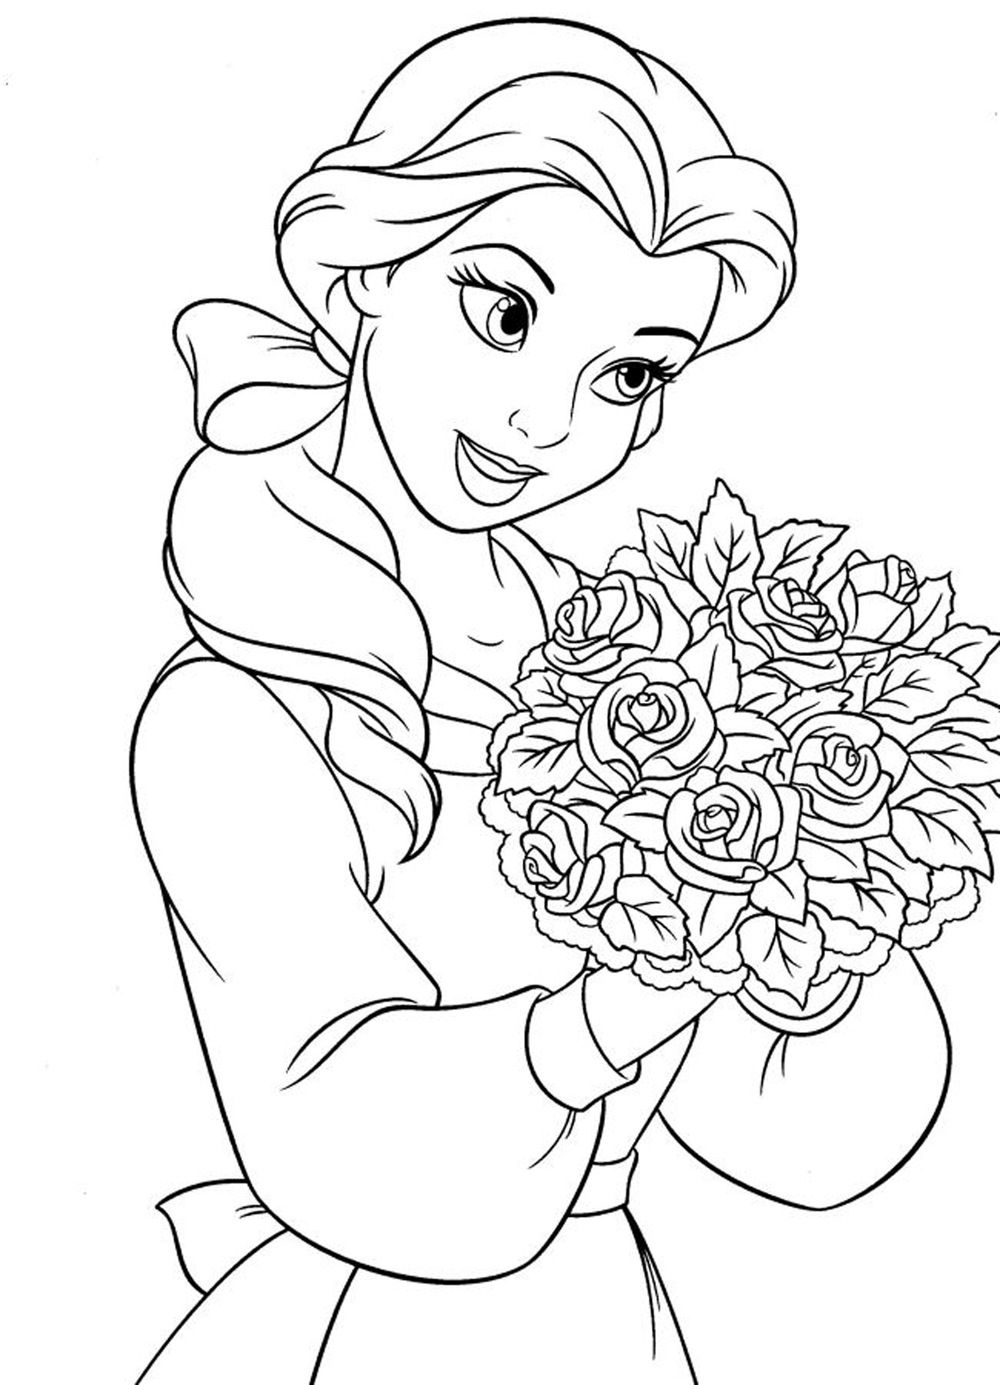 Detailed Coloring Pages For Girls at GetColoringscom